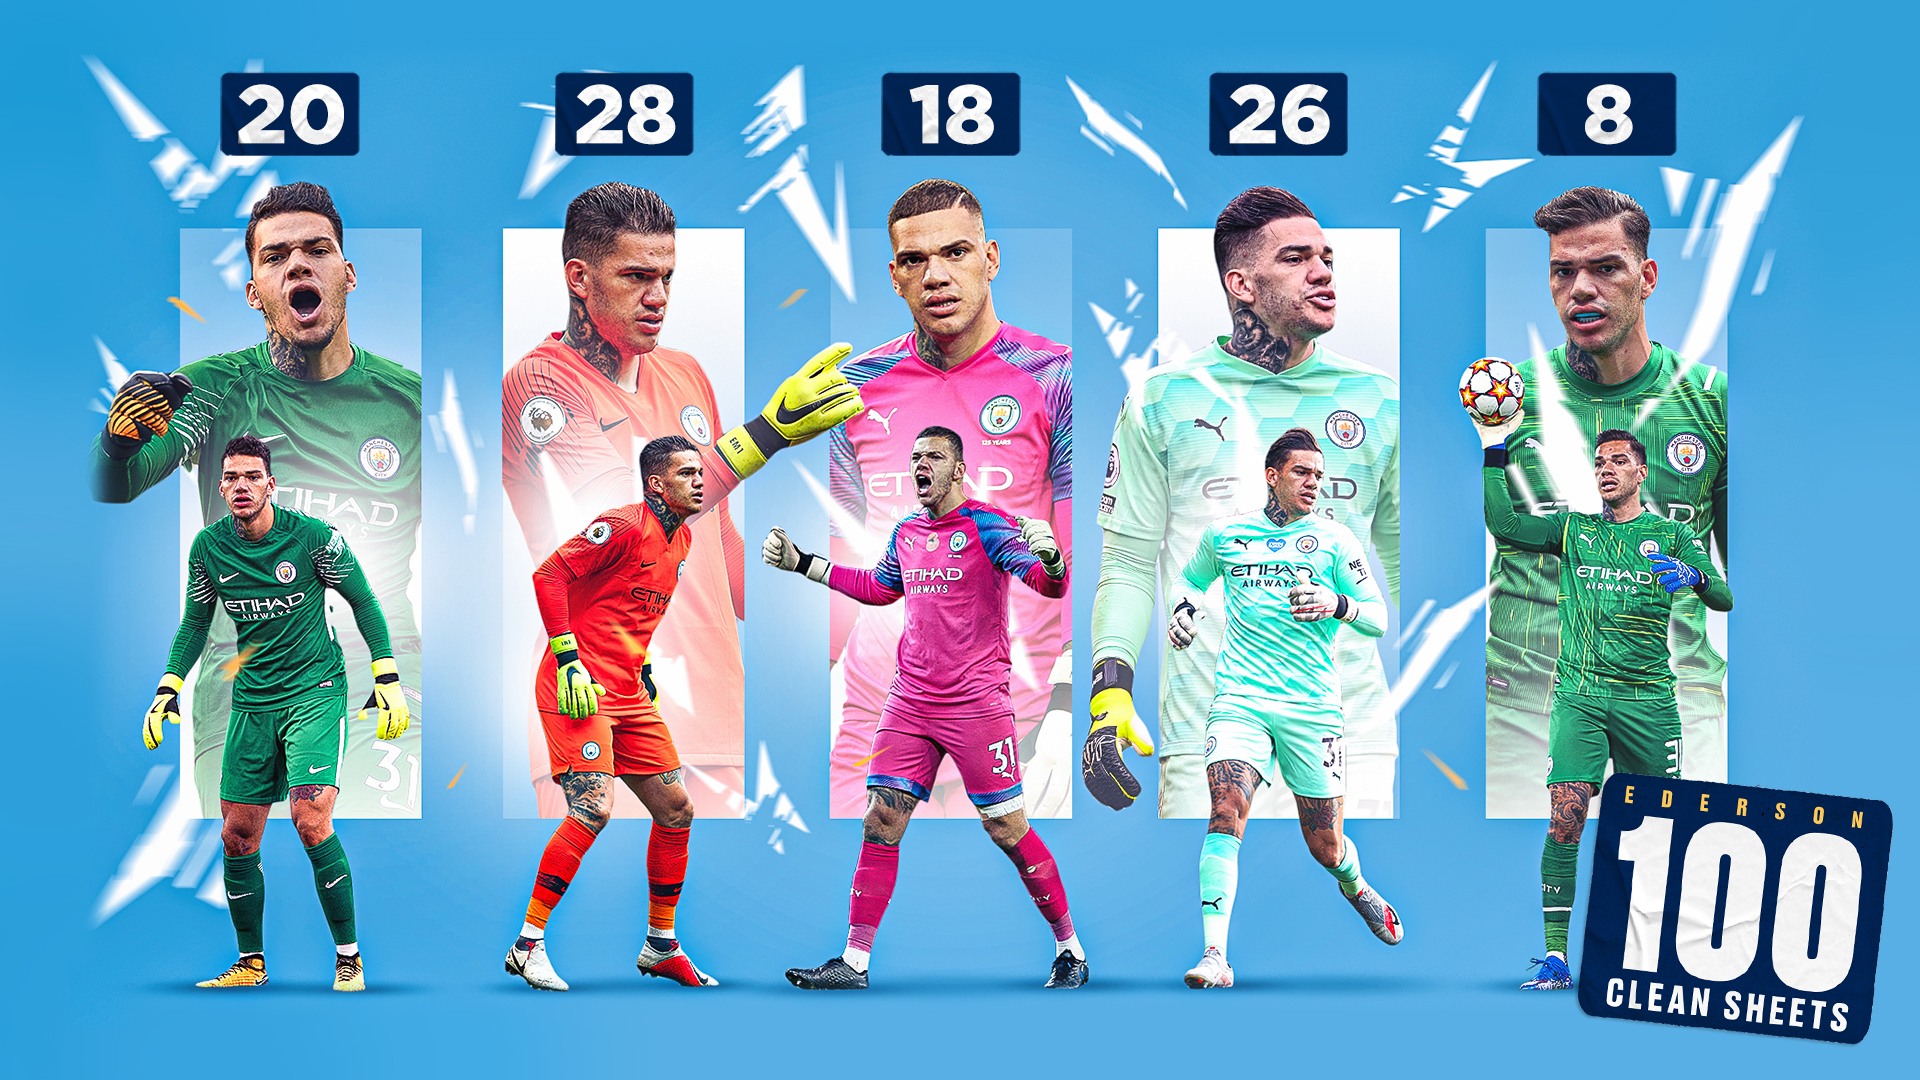 Amazing stats behind Ederson's century of clean sheets